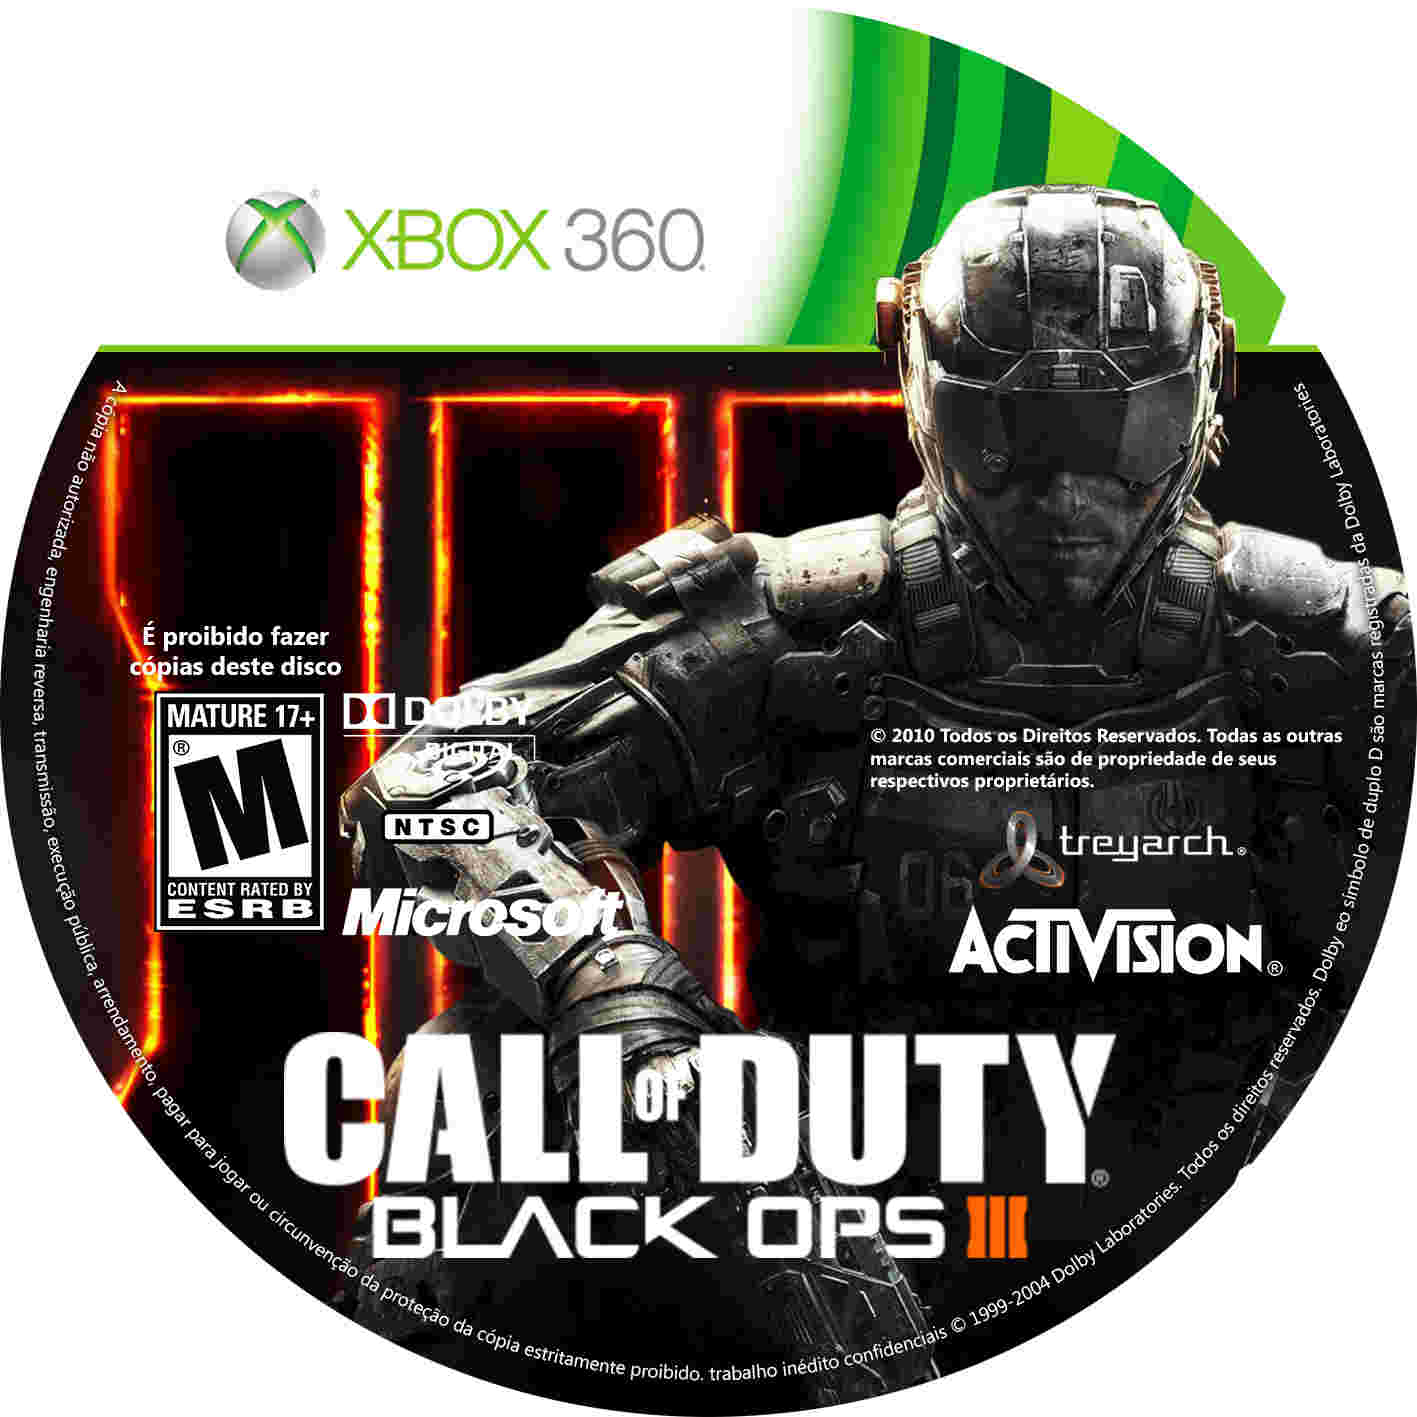 Call of duty xbox game. Call of Duty Black ops диск Xbox 360. Обложка диска Call of Duty 3 Xbox 360. Call of Duty диск на иксбокс 360. Call of Duty Black ops 3 диск Xbox 360.